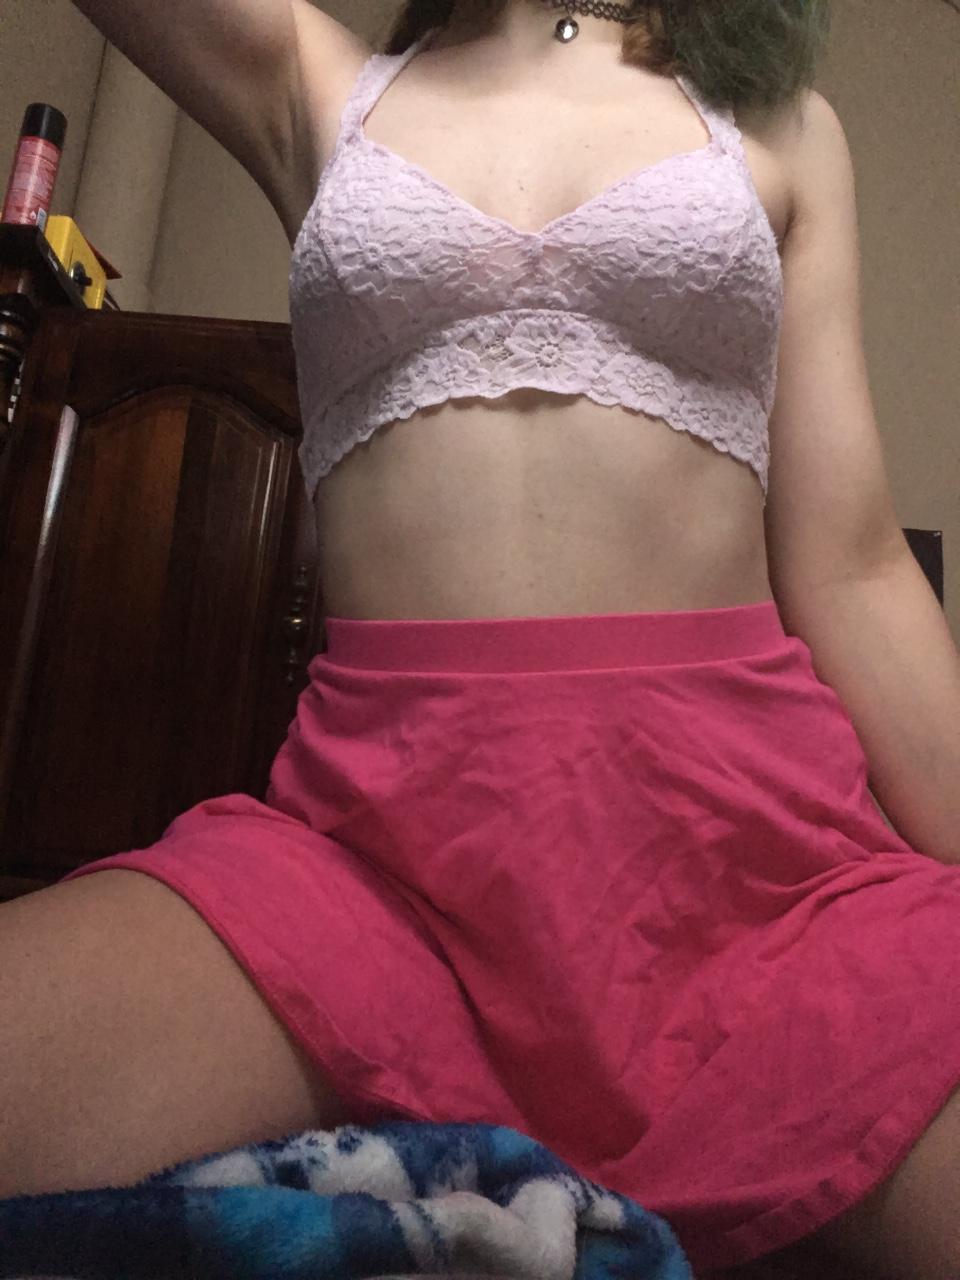 Sfw Me In A Cute Pink Outfit Porn Pic Eporner